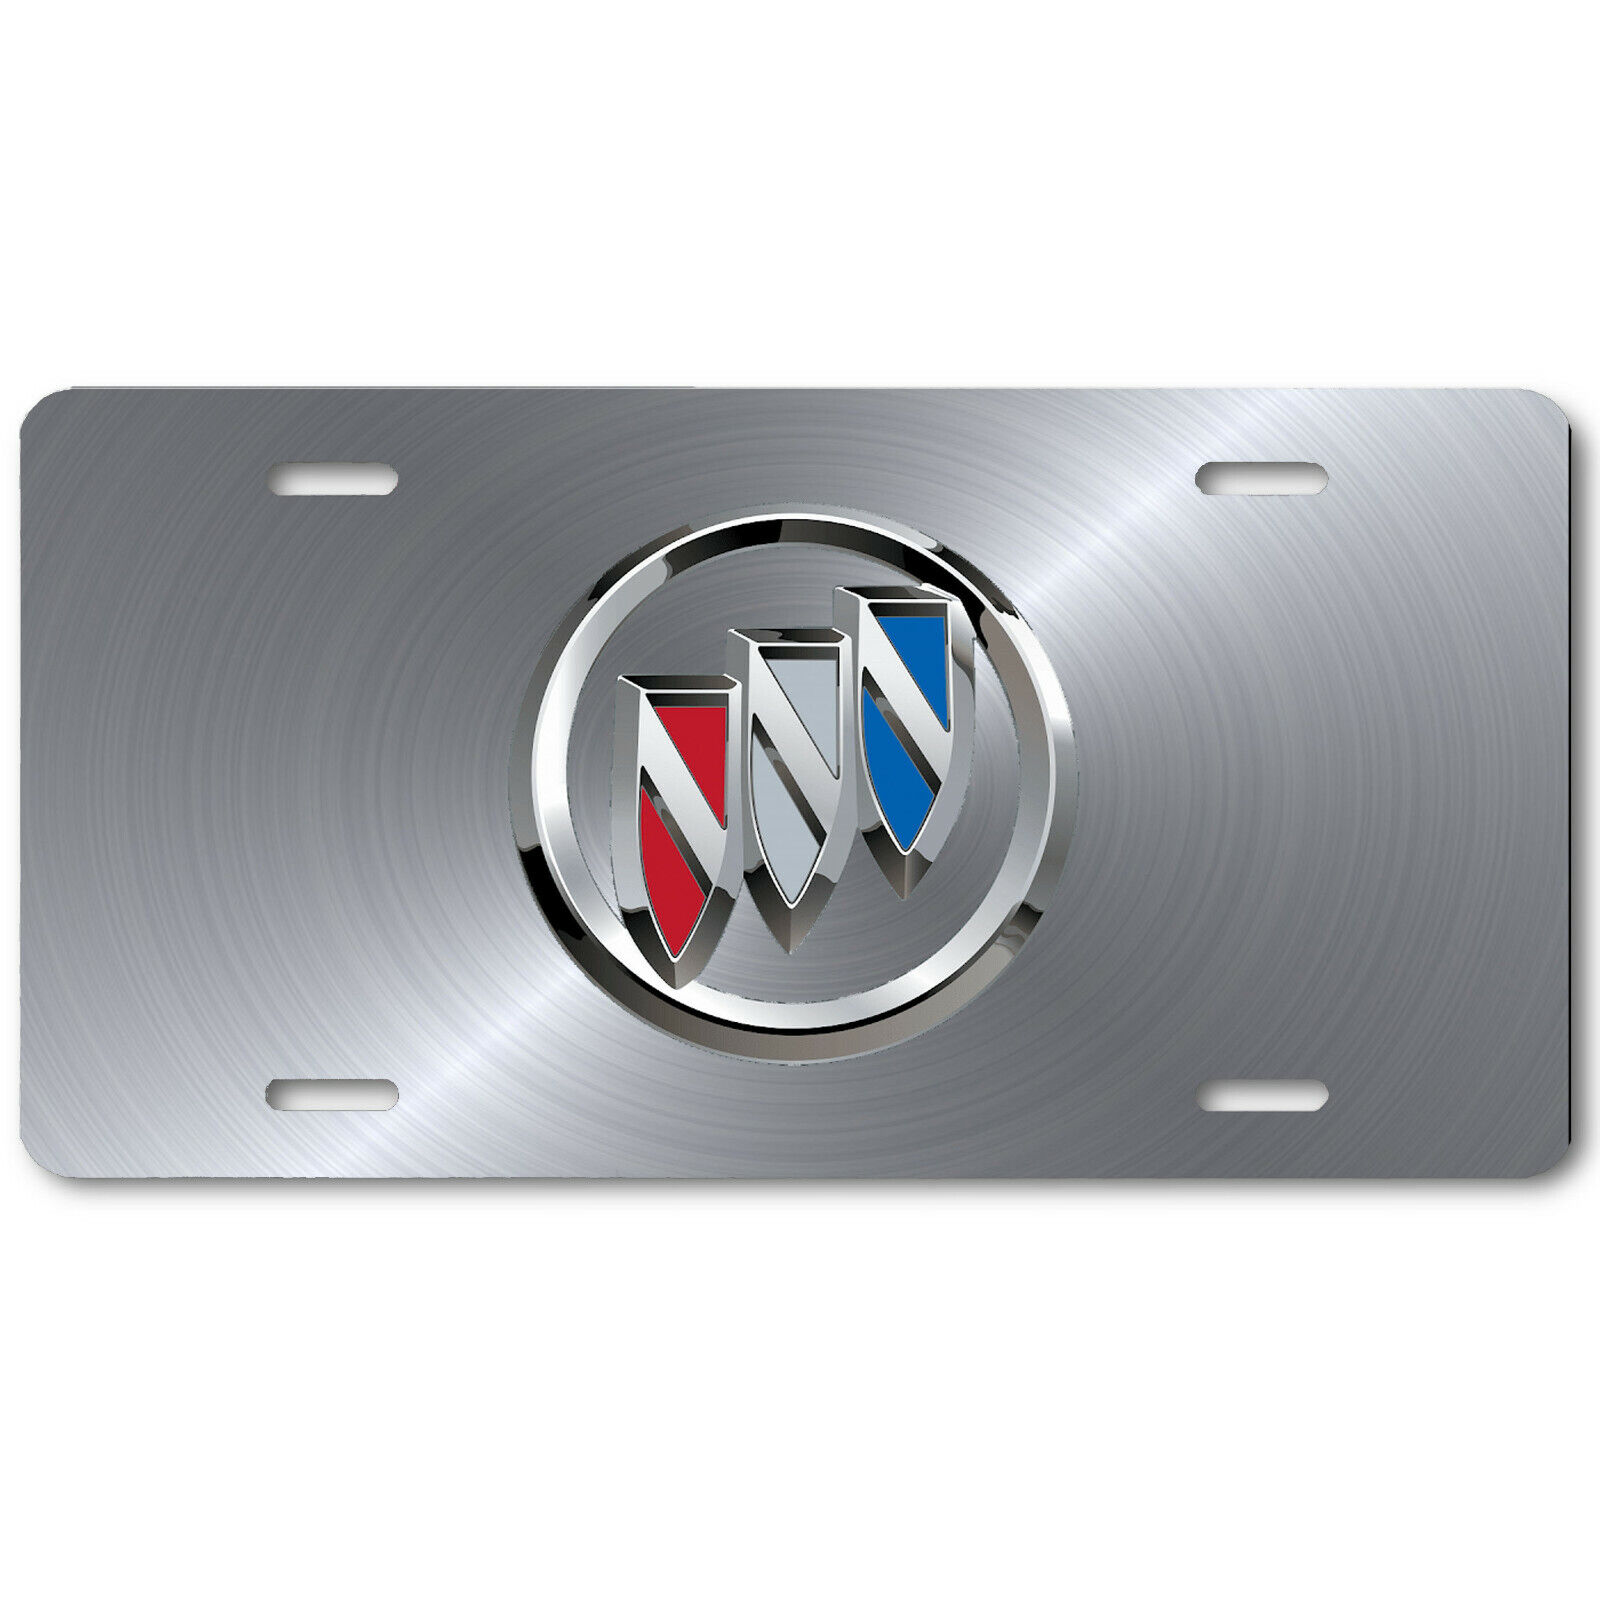 Buick Inspired Art Emblem Aluminum License Plate Tag Silver Steel Look